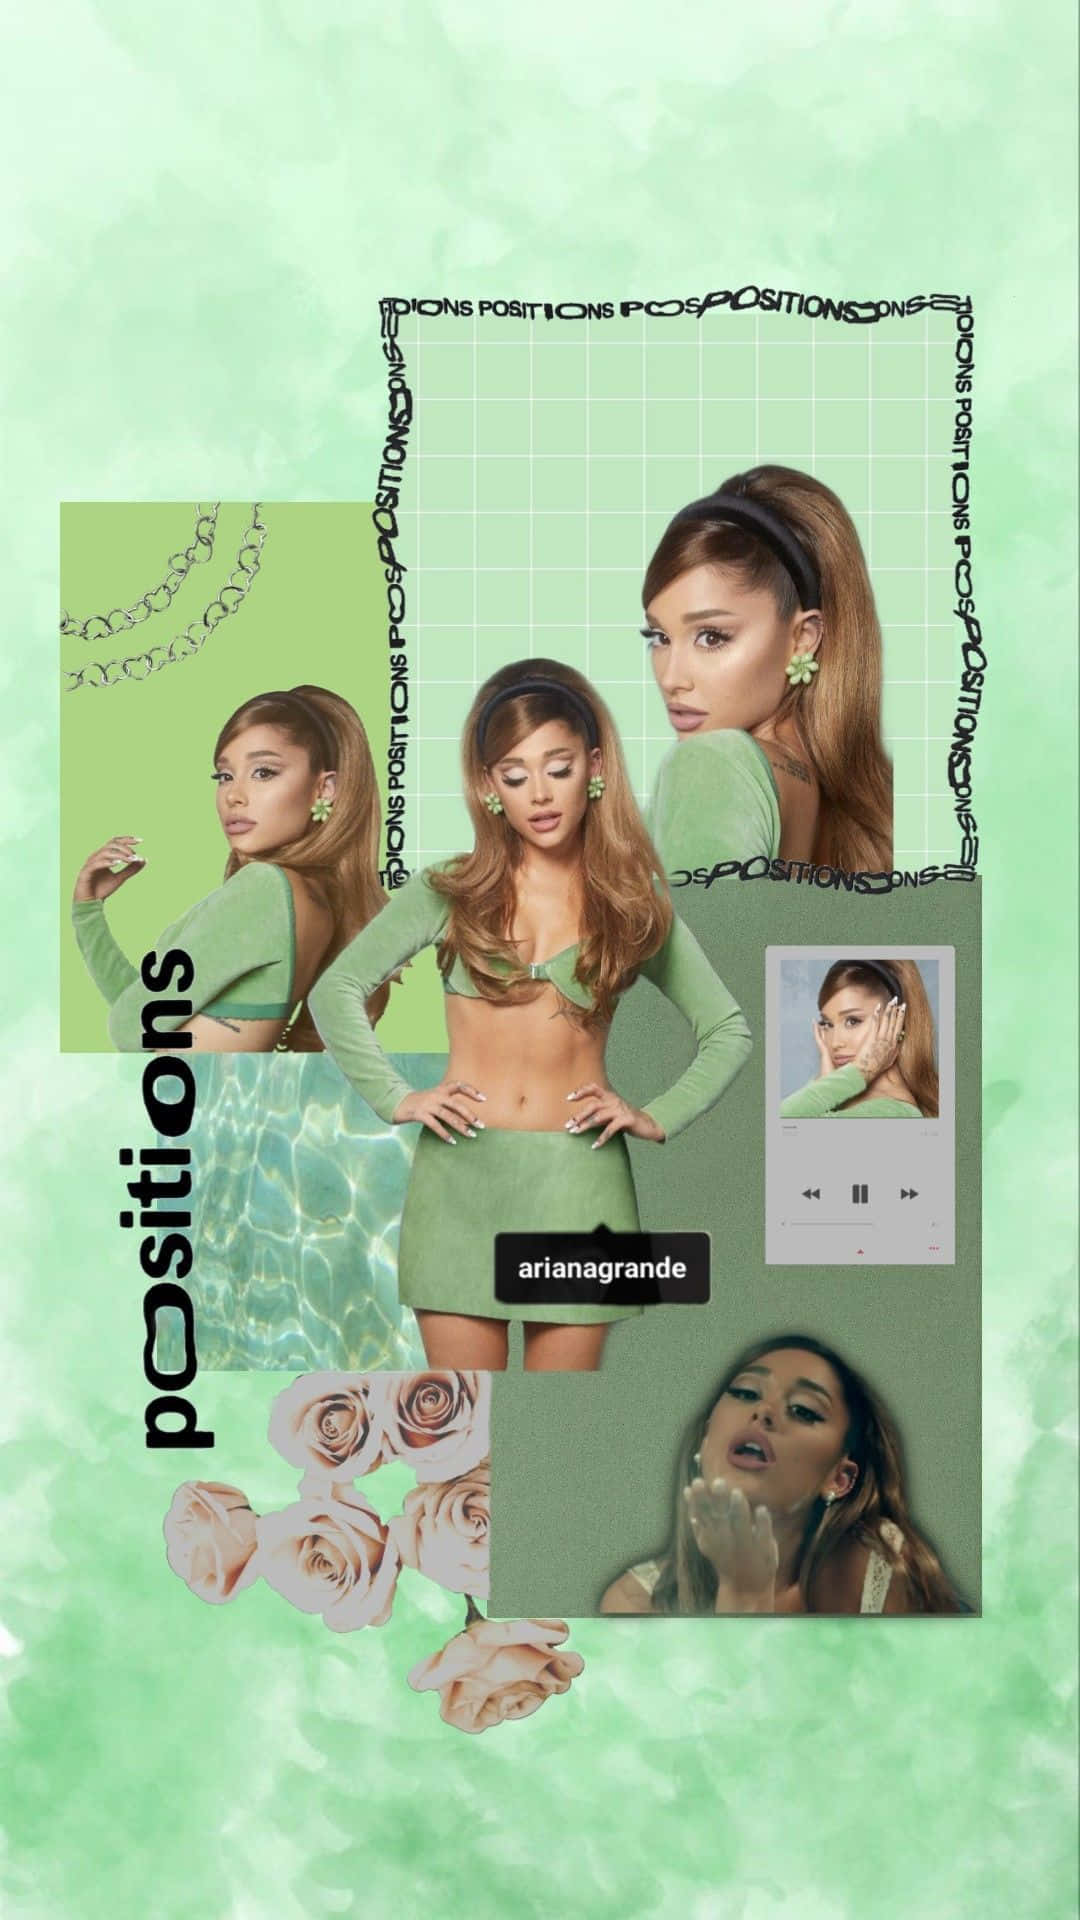 Ariana Grande Positions Collage Wallpaper